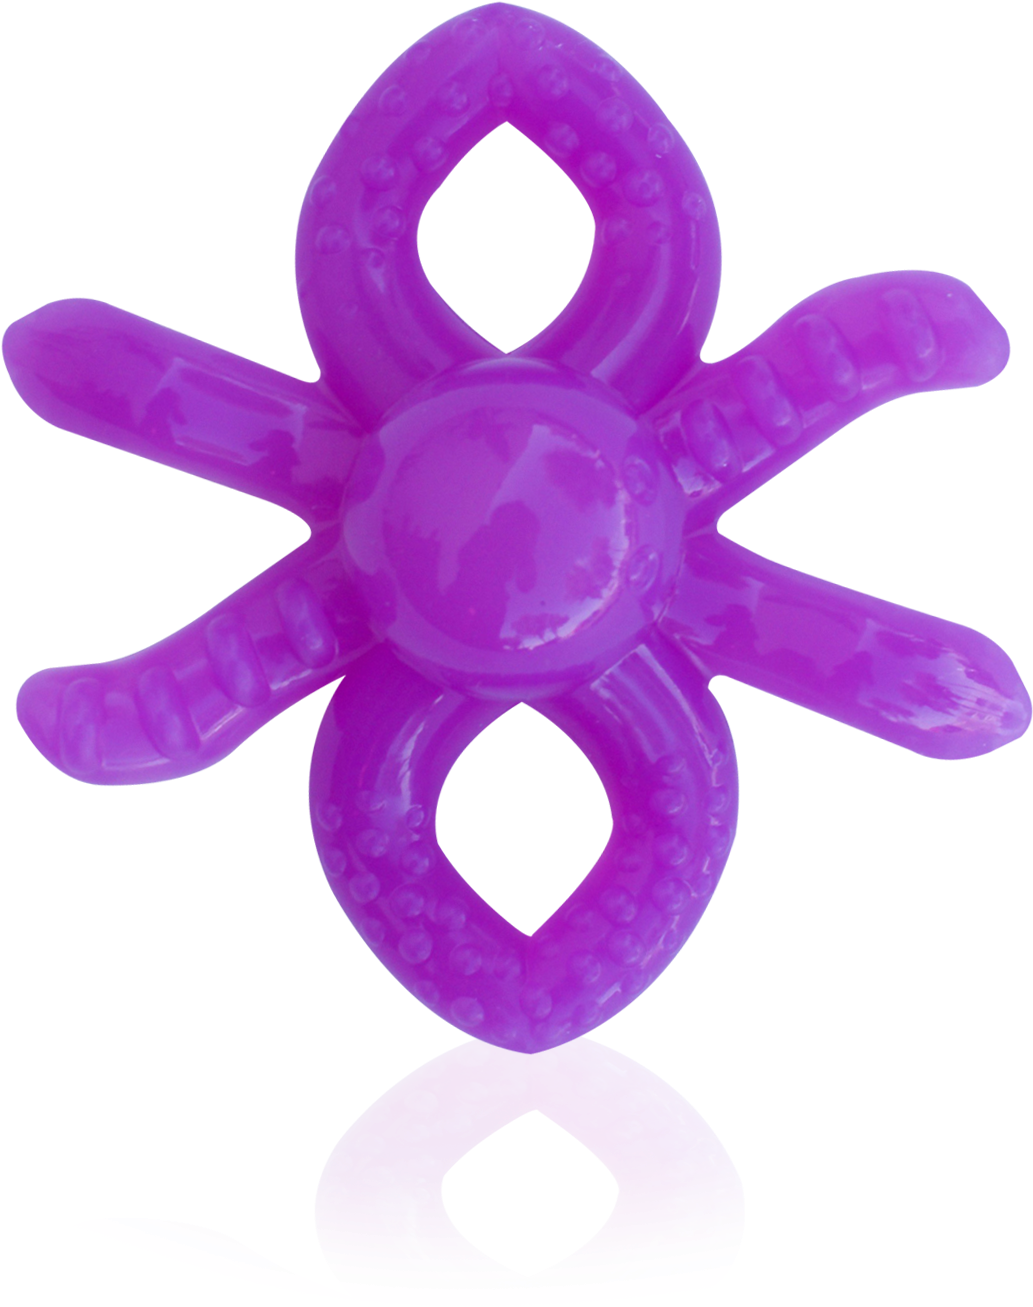 Load Image Into Gallery Viewer, Baby Banana Octo Brush - Brush (1299x1680), Png Download